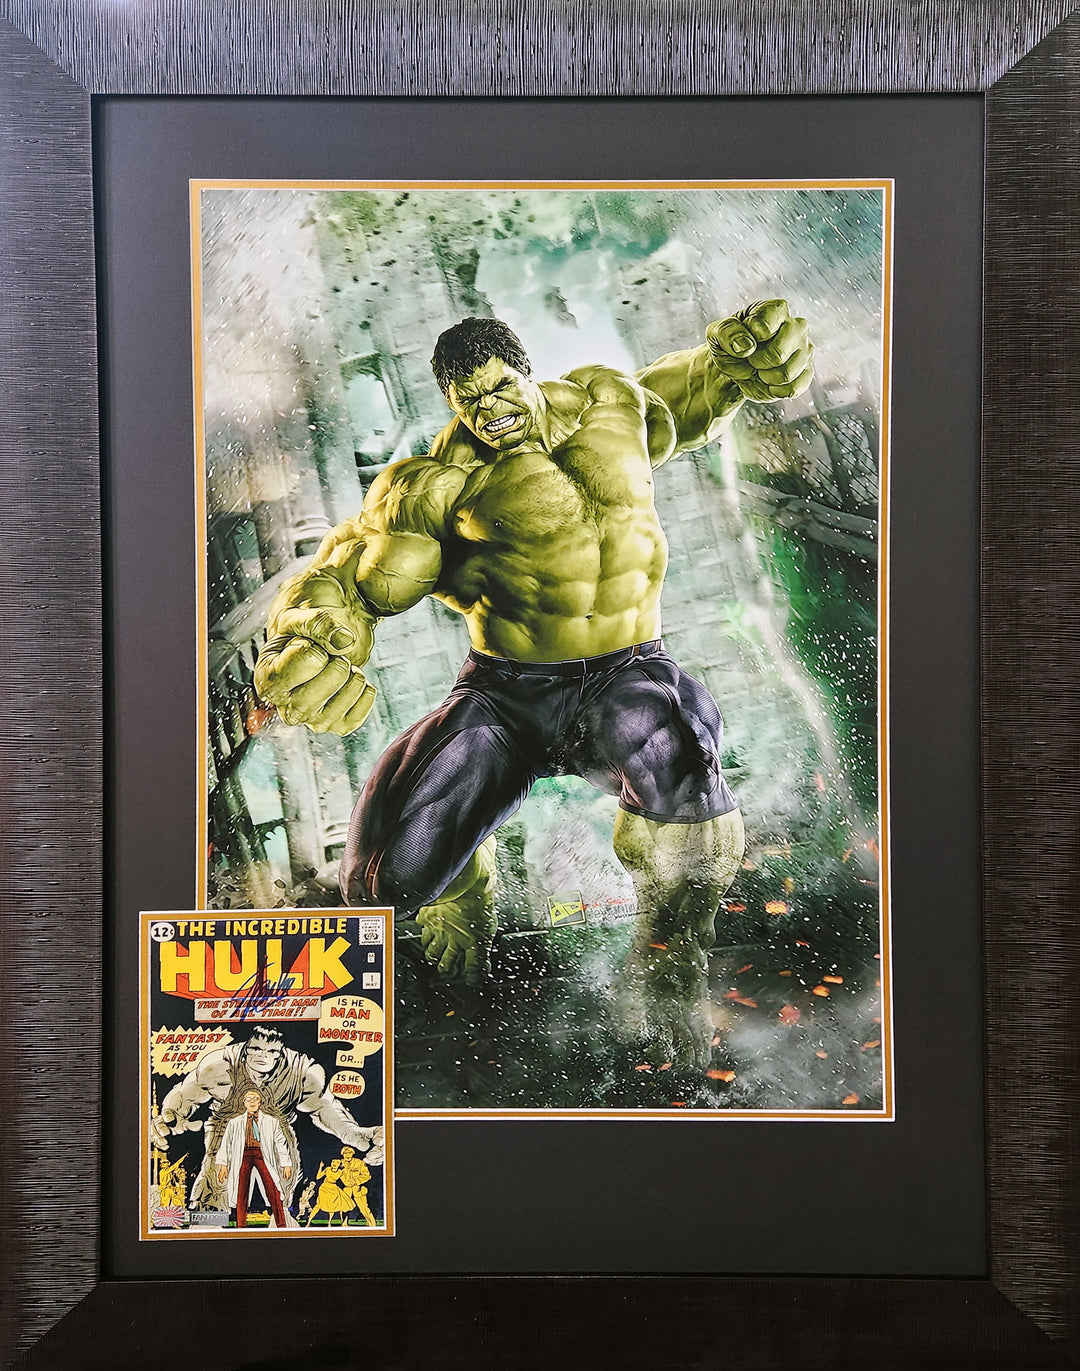 The Incredible Hulk #1 Framed Print Signed By Stan Lee, Marvel, Pop Culture Art, Comics, Autographed, Signed, AAOOCC33225